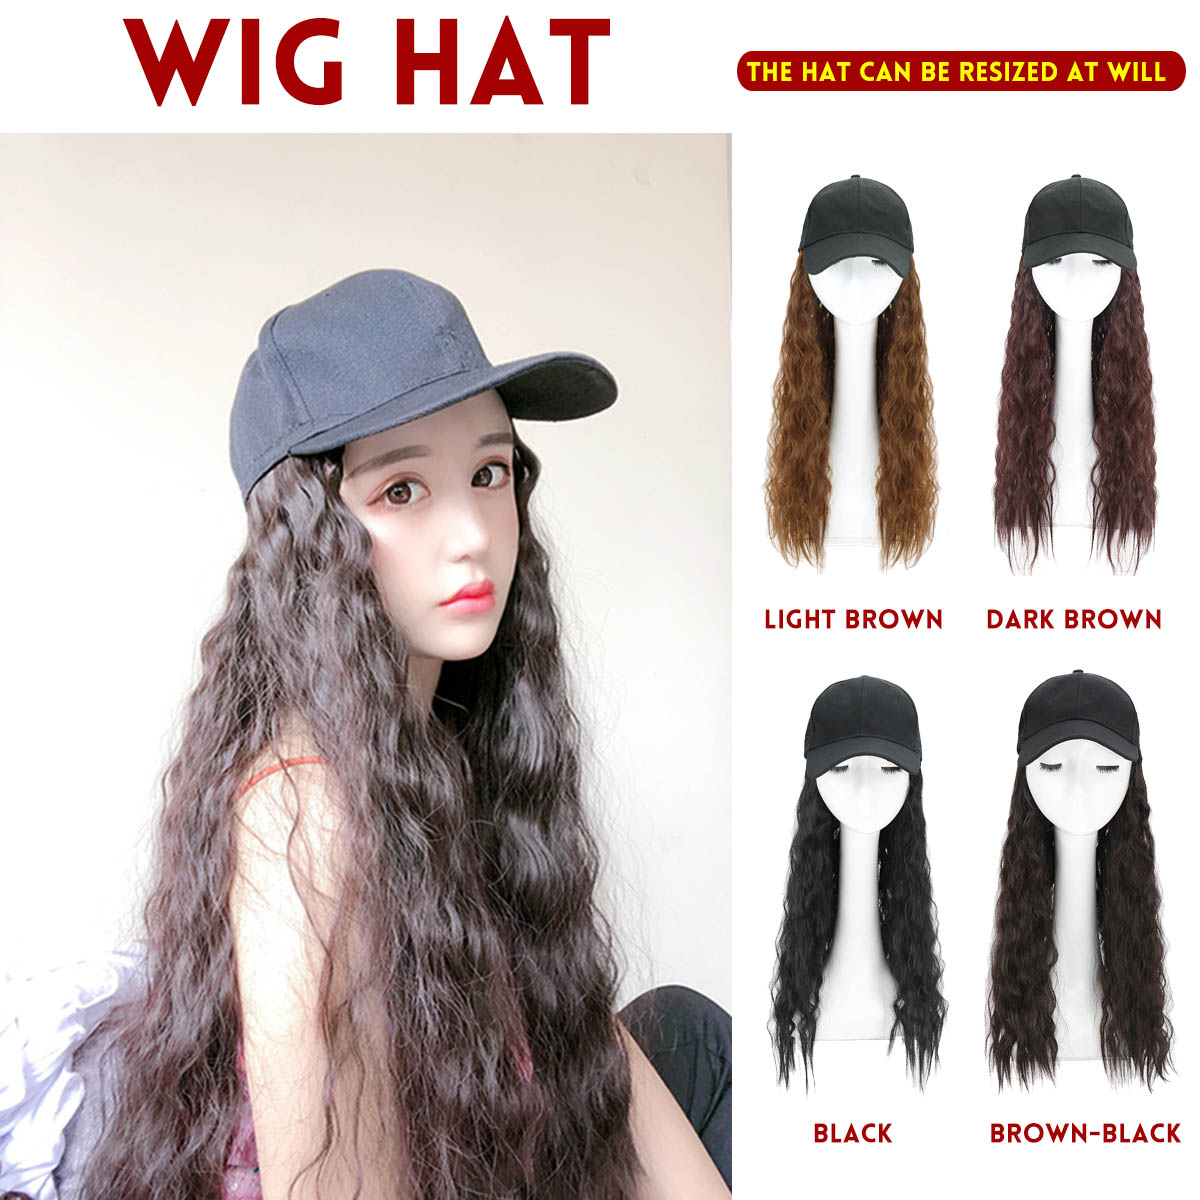 Woman-Girl-Cap-Wig-Hat-Light-Long-Wavy-Halloween-Party-Curly--Club-Winter-1619885-1